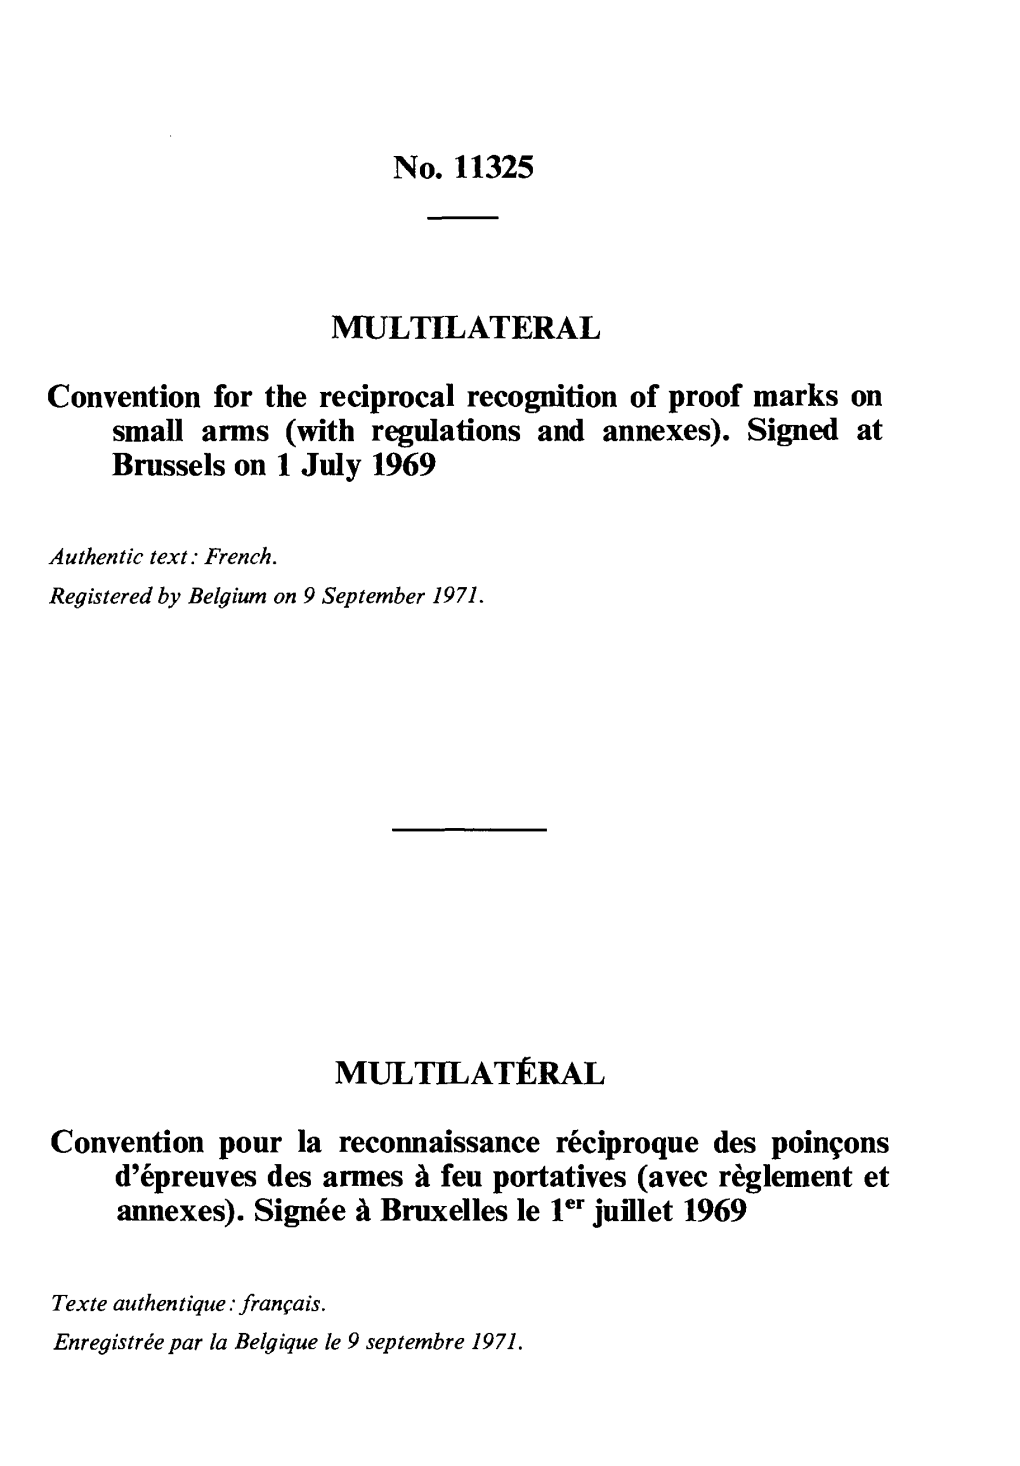 Convention for the Reciprocal Recognition of Proof Marks on Small Arms (With Regulations and Annexes)